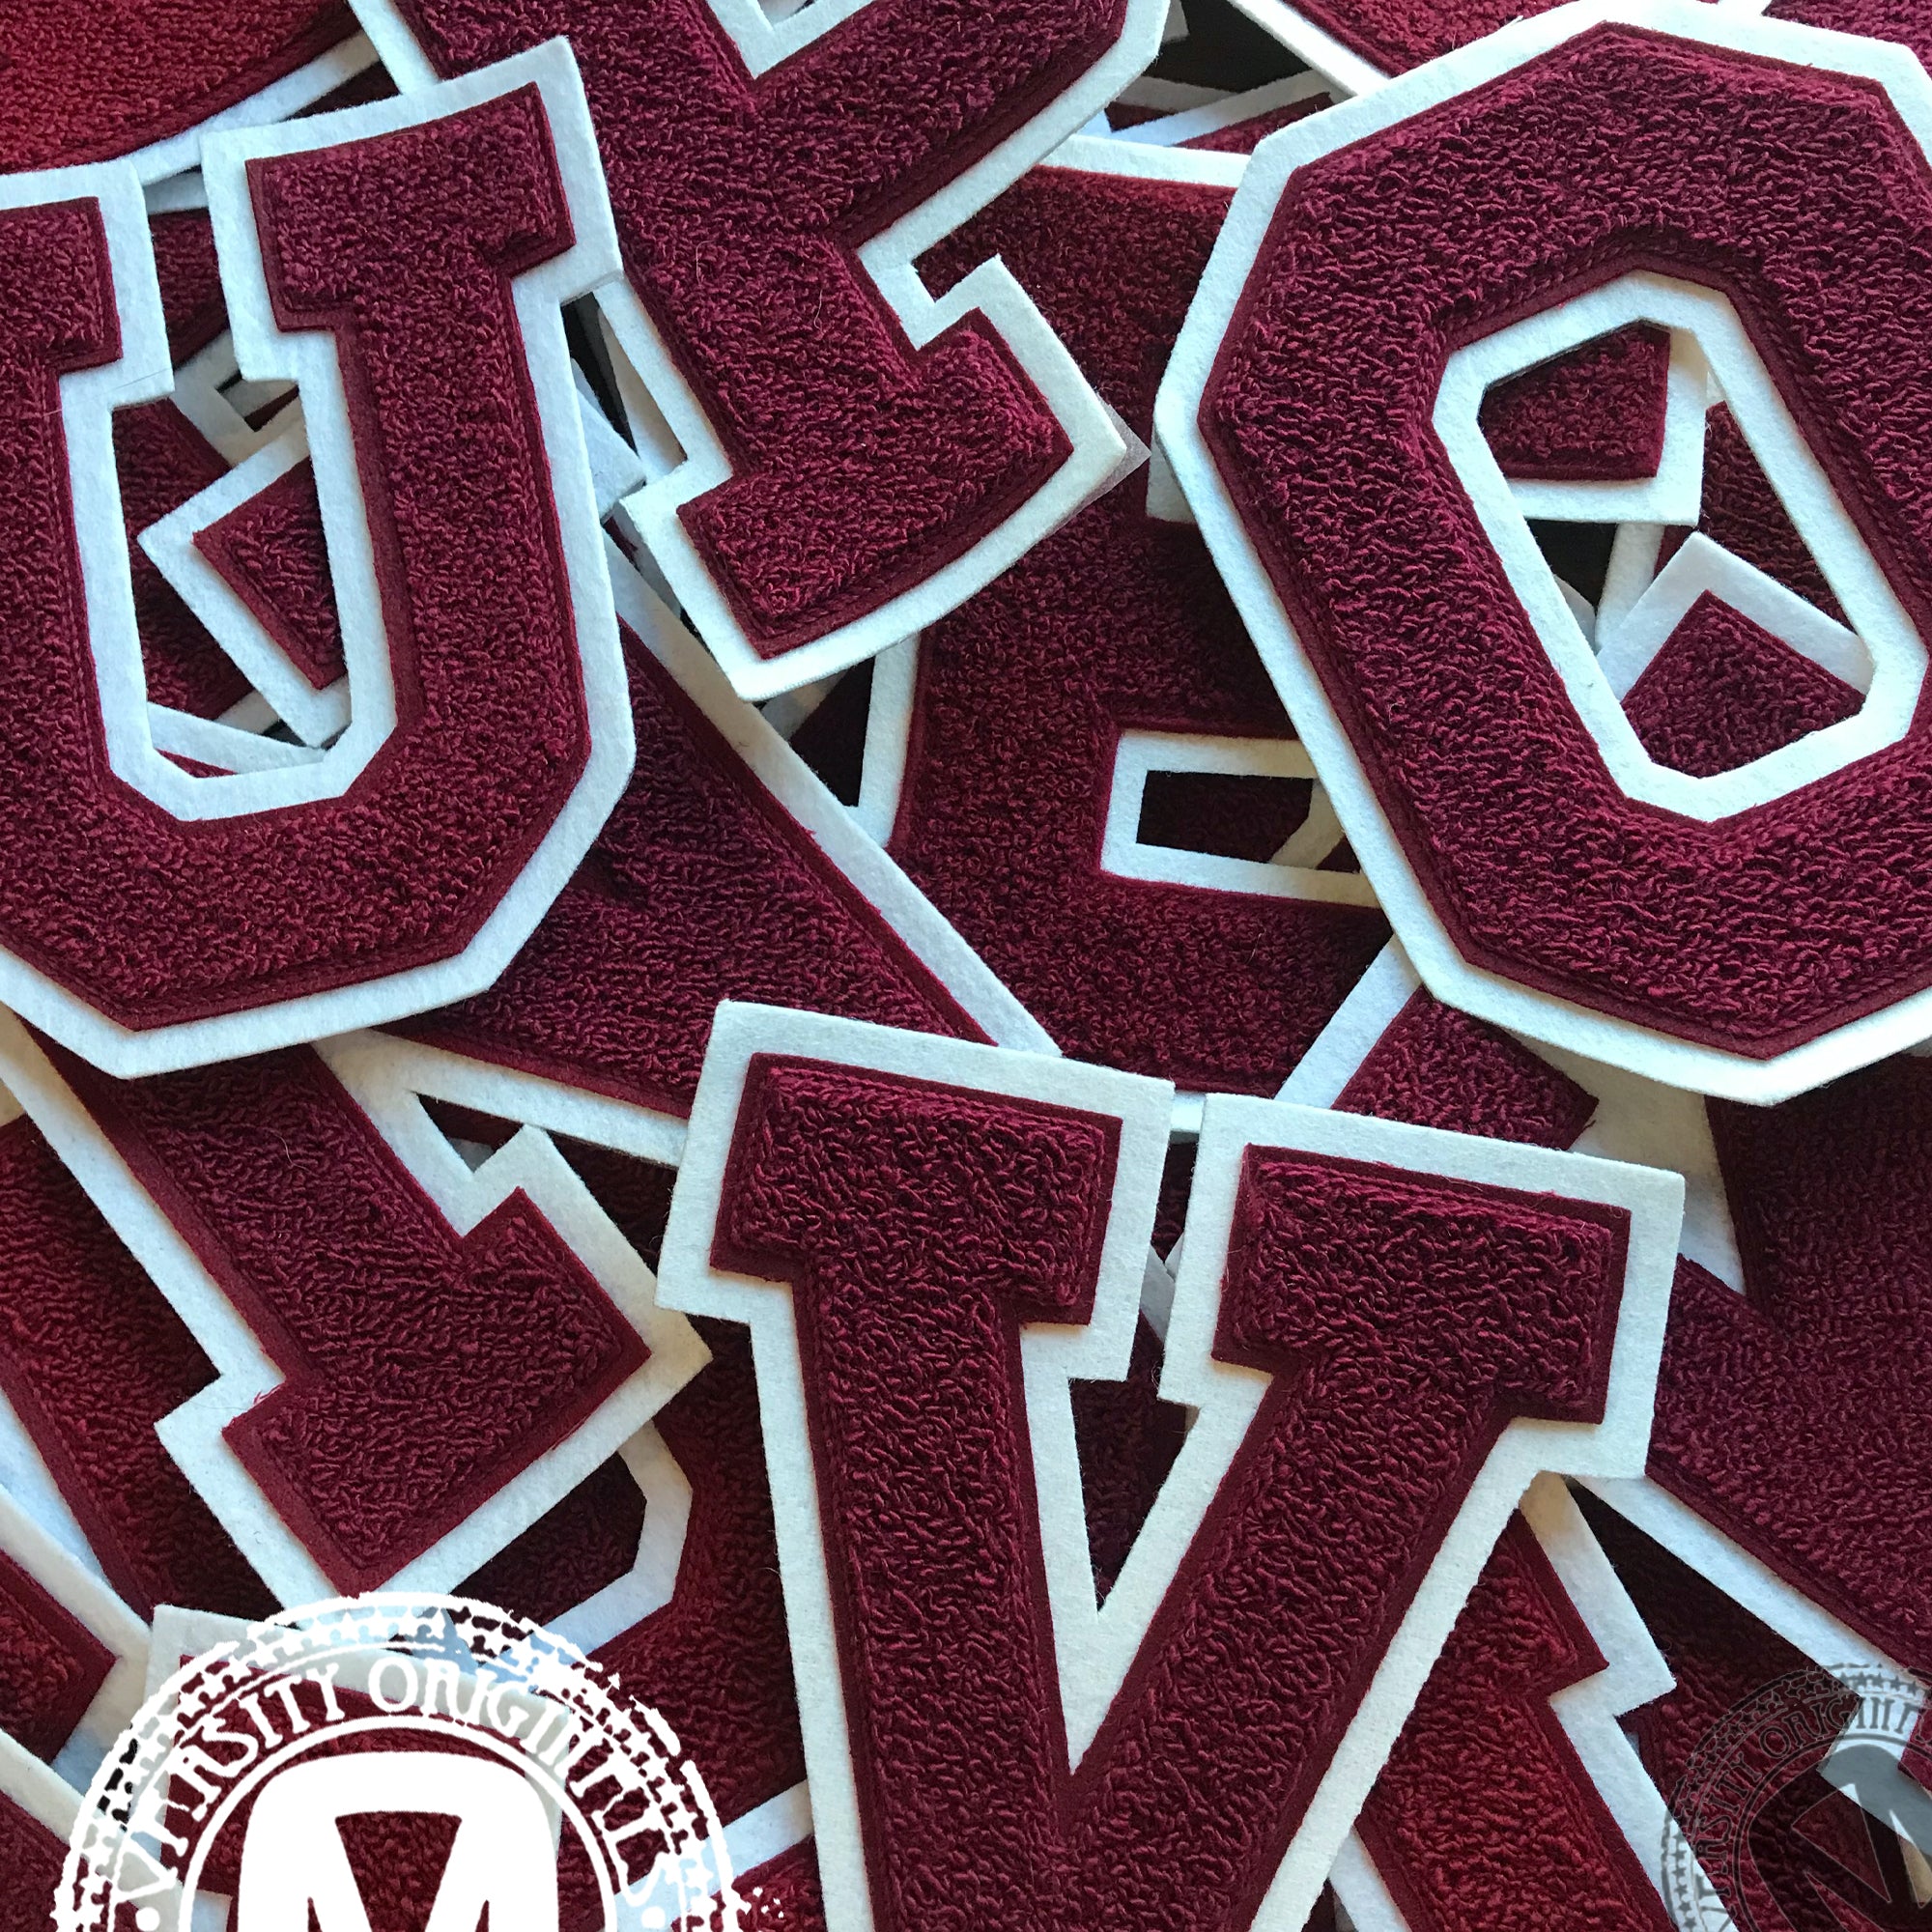 Cardinal/White 6" Chenille Varsity Letter Patches